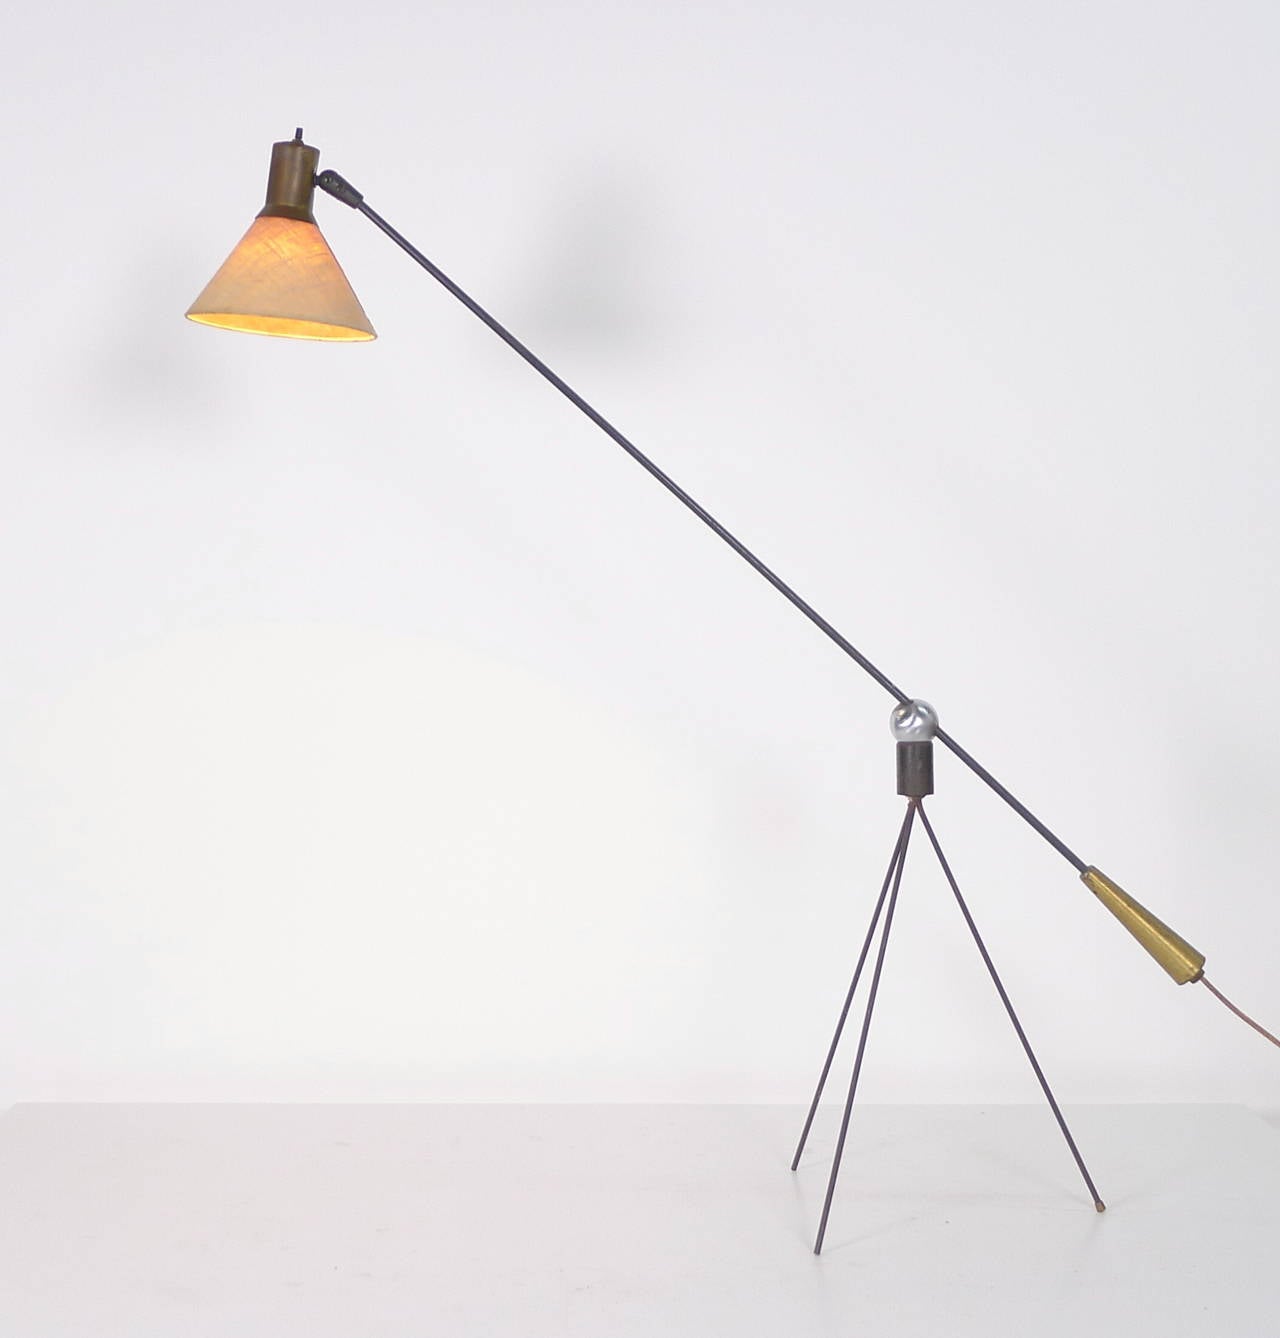 Gilbert Watrous, for the MOMA low cost lighting competition of 1951, organized by amongst others, Marcel Breuer. Produced by the Heifetz Lighting Company. This lamp received special mention in the prize selection and was the only lamp of the